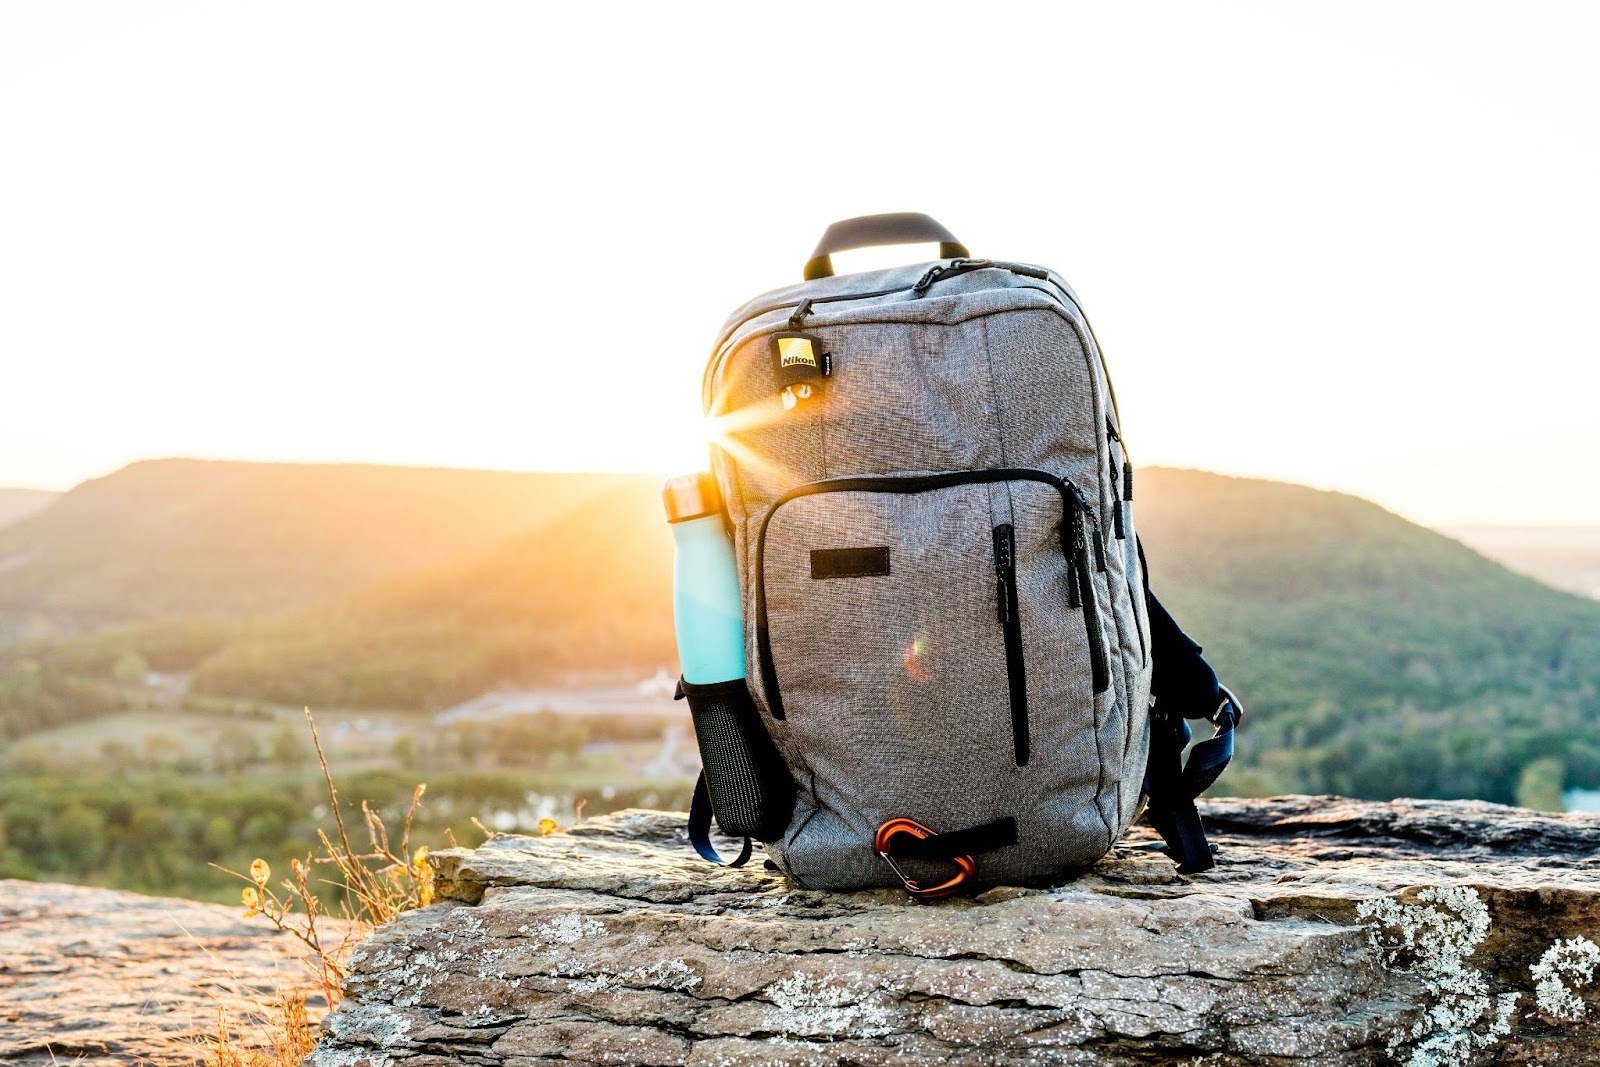 a backpack on a rock with the sun shining behind it, highlighting that staying safe while hiking depends on being prepared